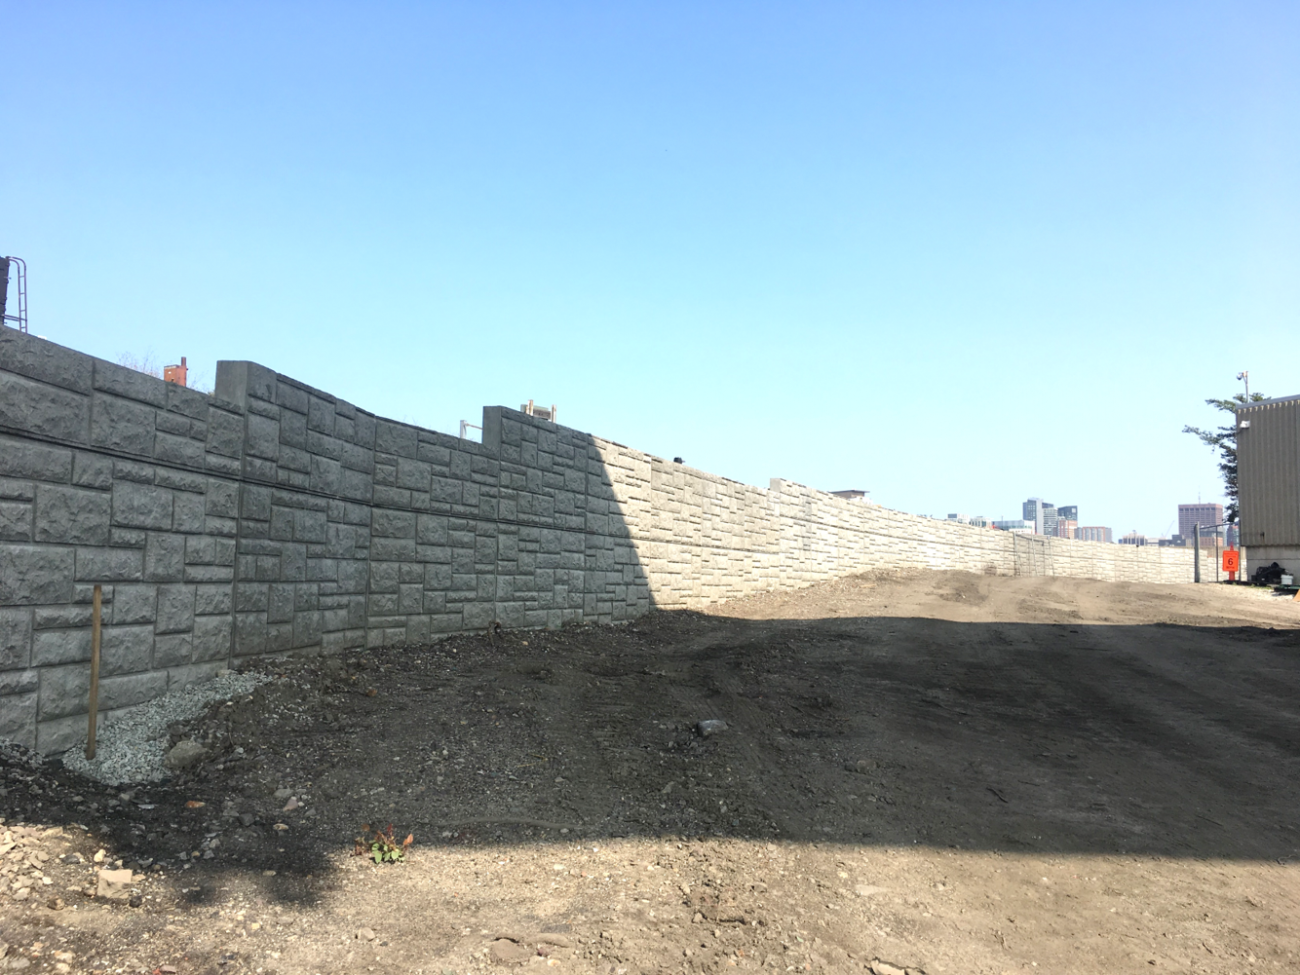 New test track in South Boston: Installation of a retaining wall (September 2018).